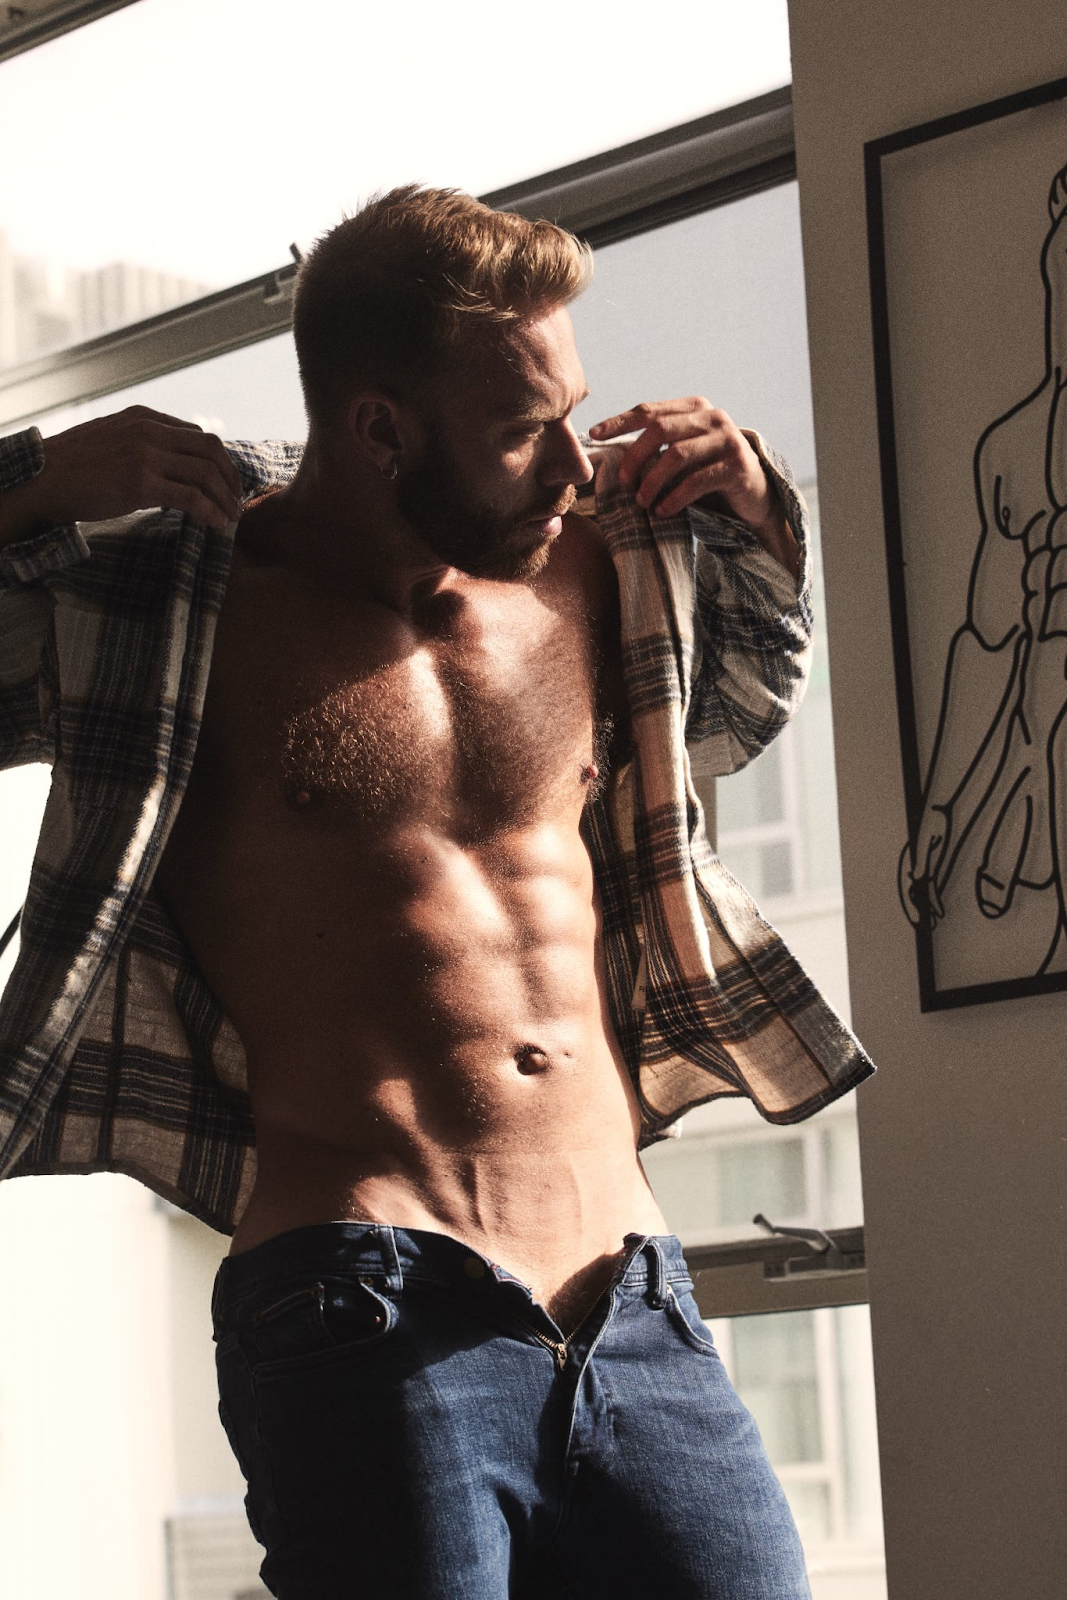 Brogan wearing an open flannel shirt staring into the distance also wearing unbuttoned blue jeans revealing the tip of his pubes